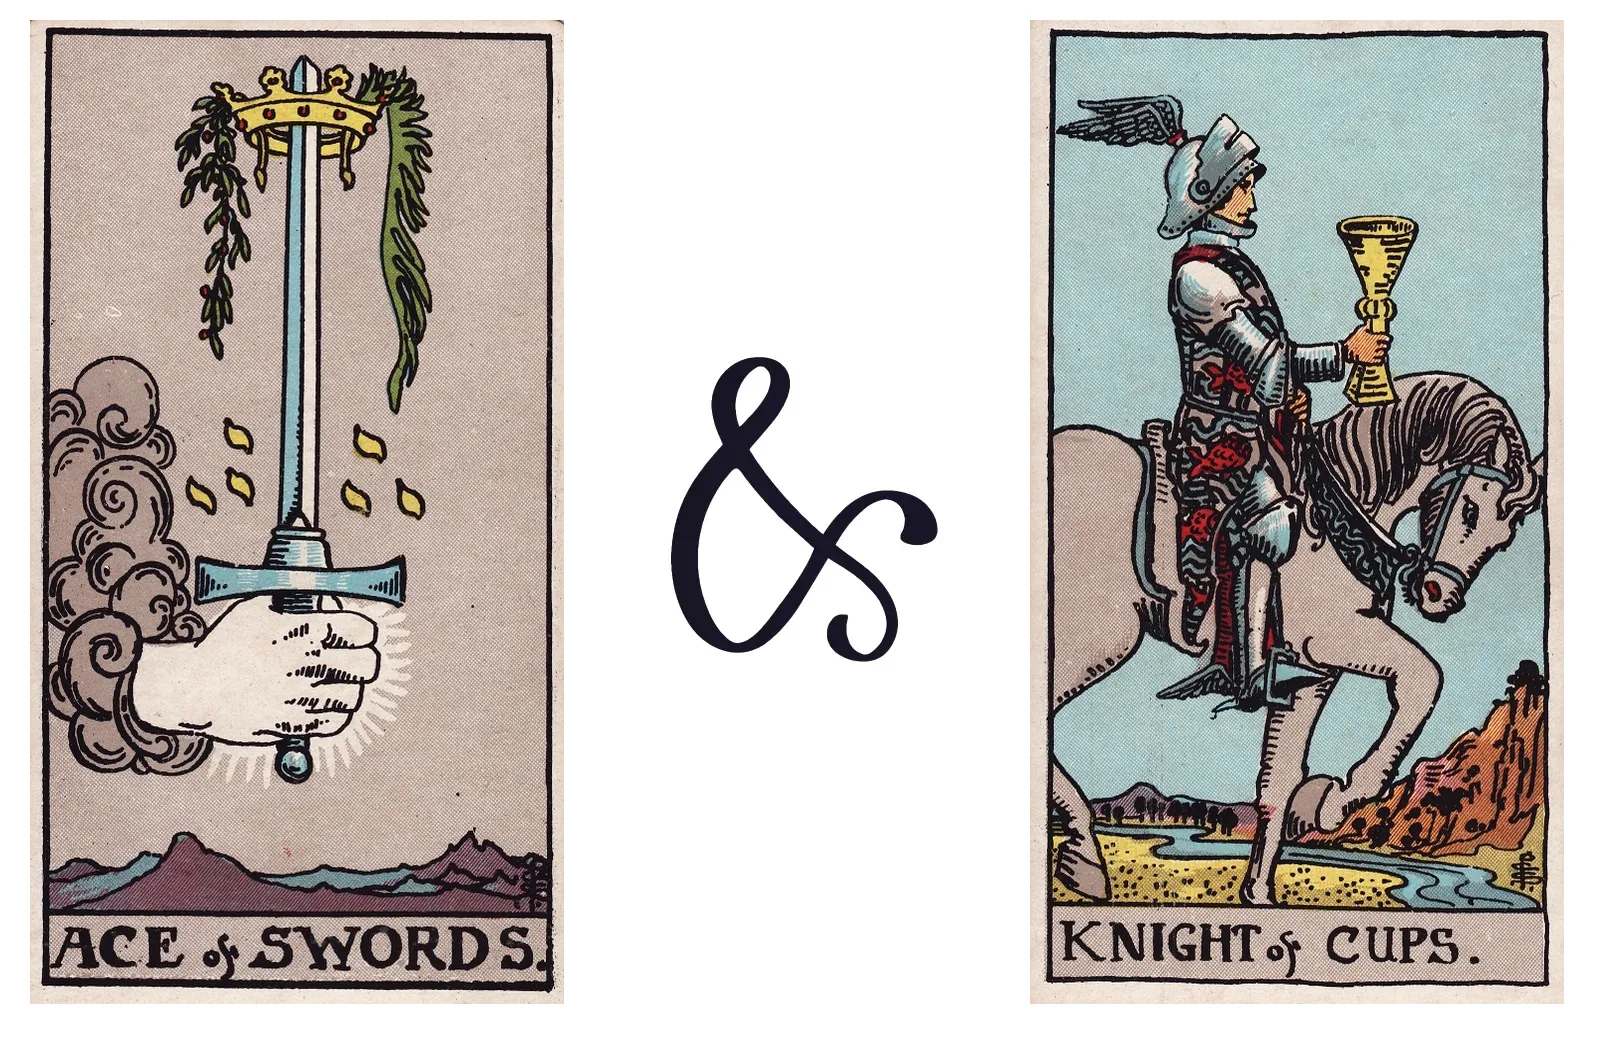 Ace of Swords and Knight of Cups